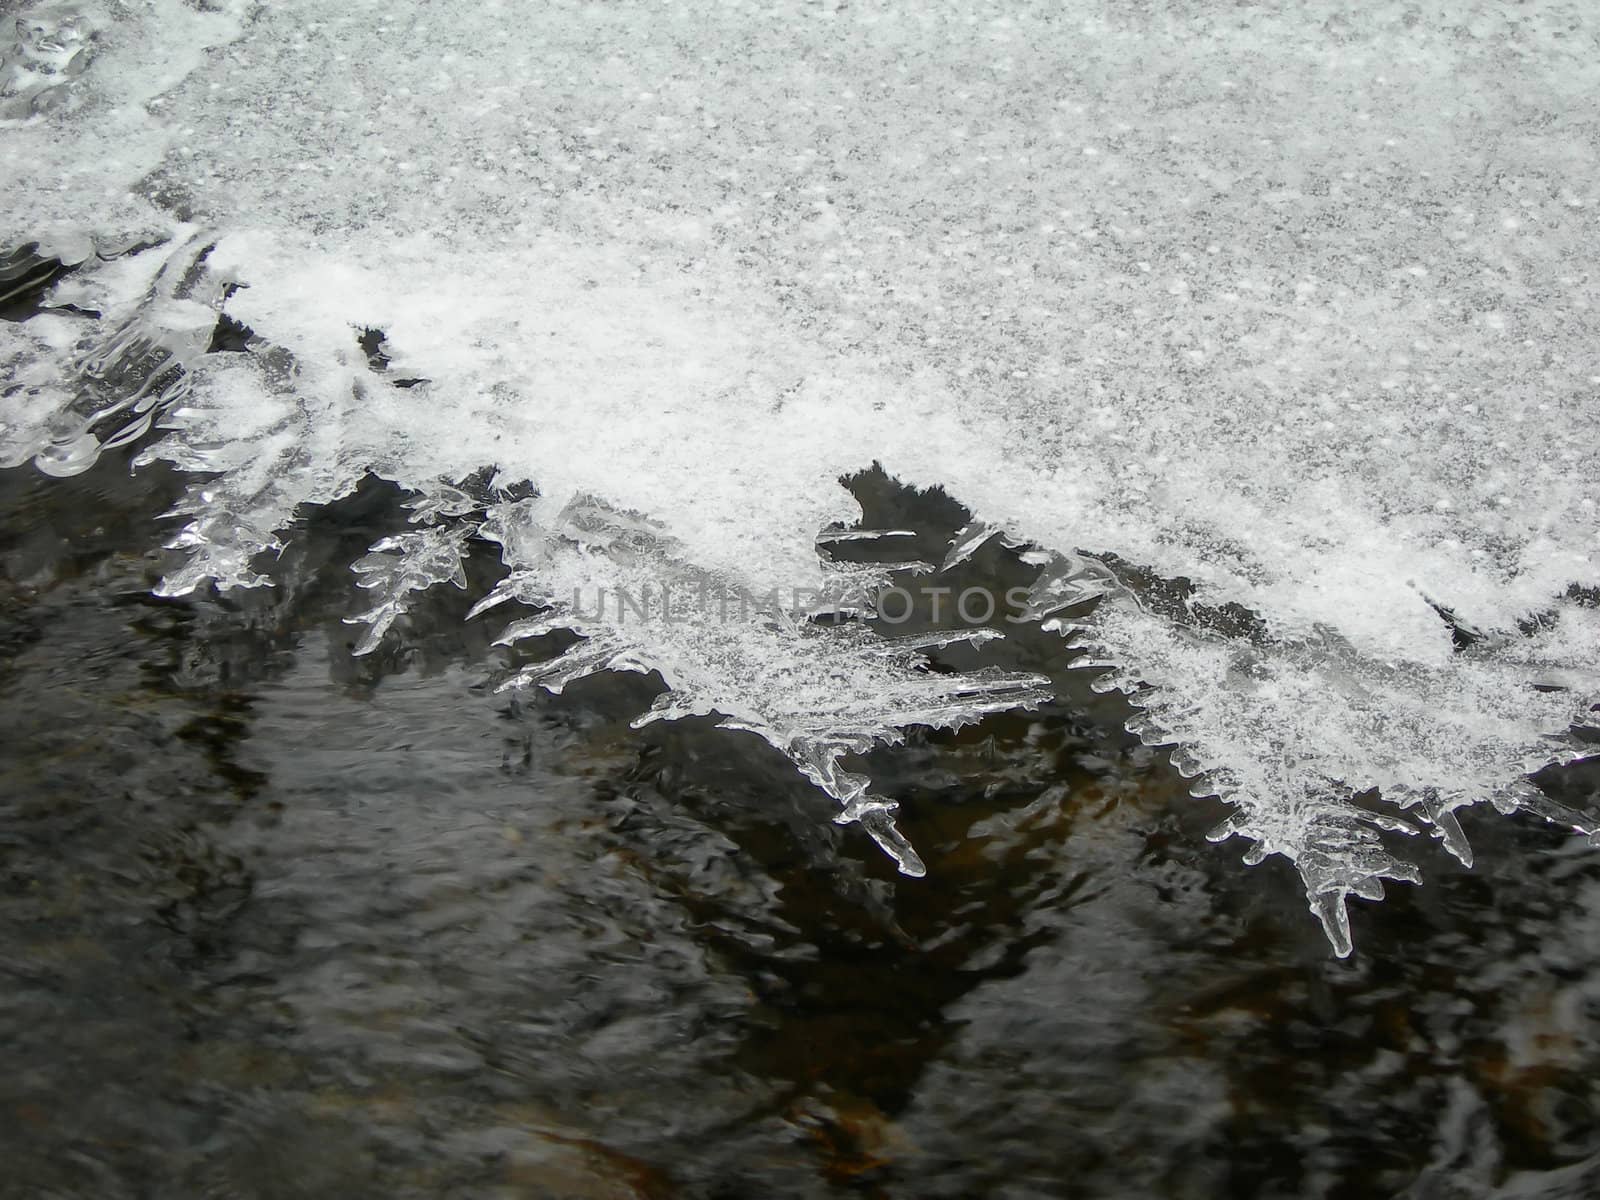              Brook is covered by ice and water flows under them with a small strem            